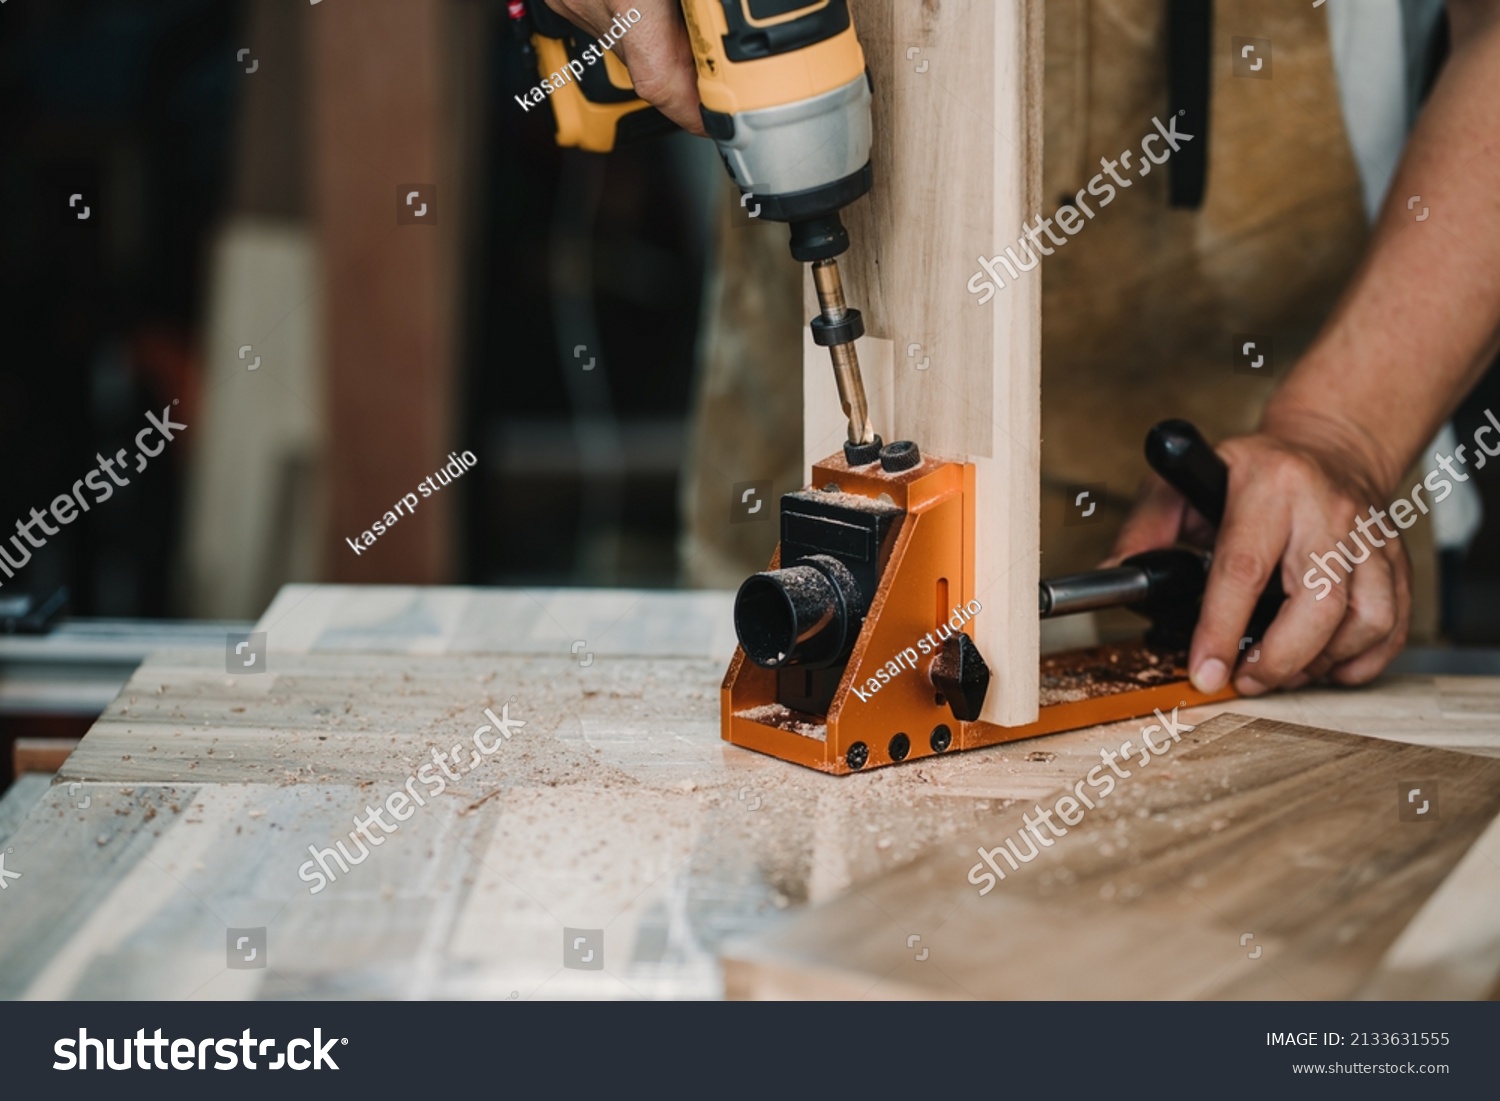 carpenter use drill bit and centering dowel jig or pocket hole jig tool to make strong joints on wooden plate. woodworking concept.selective focus. #2133631555